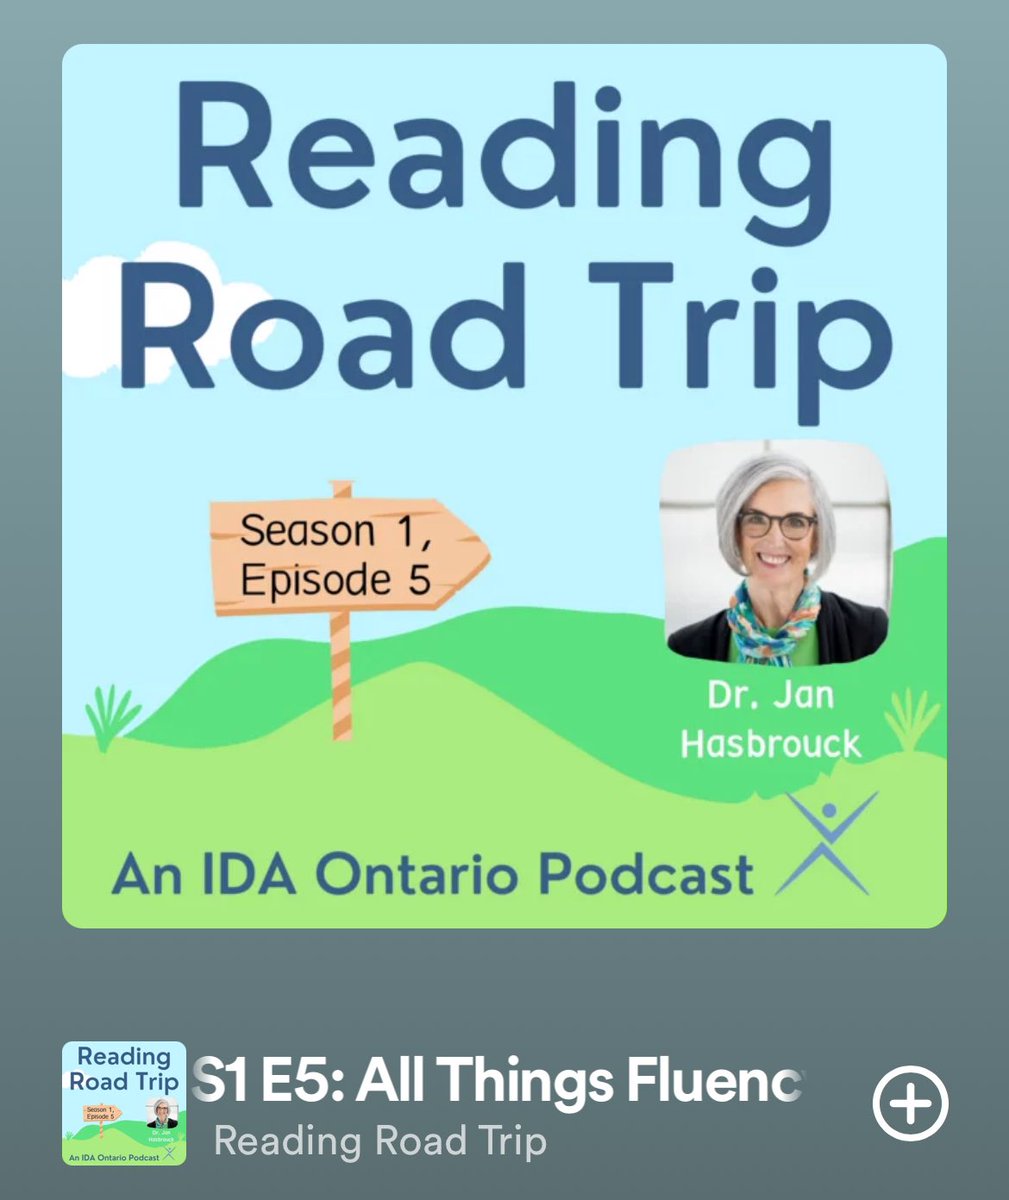 Really enjoyed this episode with @janhasbrouck on reading fluency. I love the “engine light” analogy as well for the 1 min screener. It INDICATES something is going on - but then we need to dive deeper to discover what is going on & how can we support. @IDA_Ontario @thismomloves